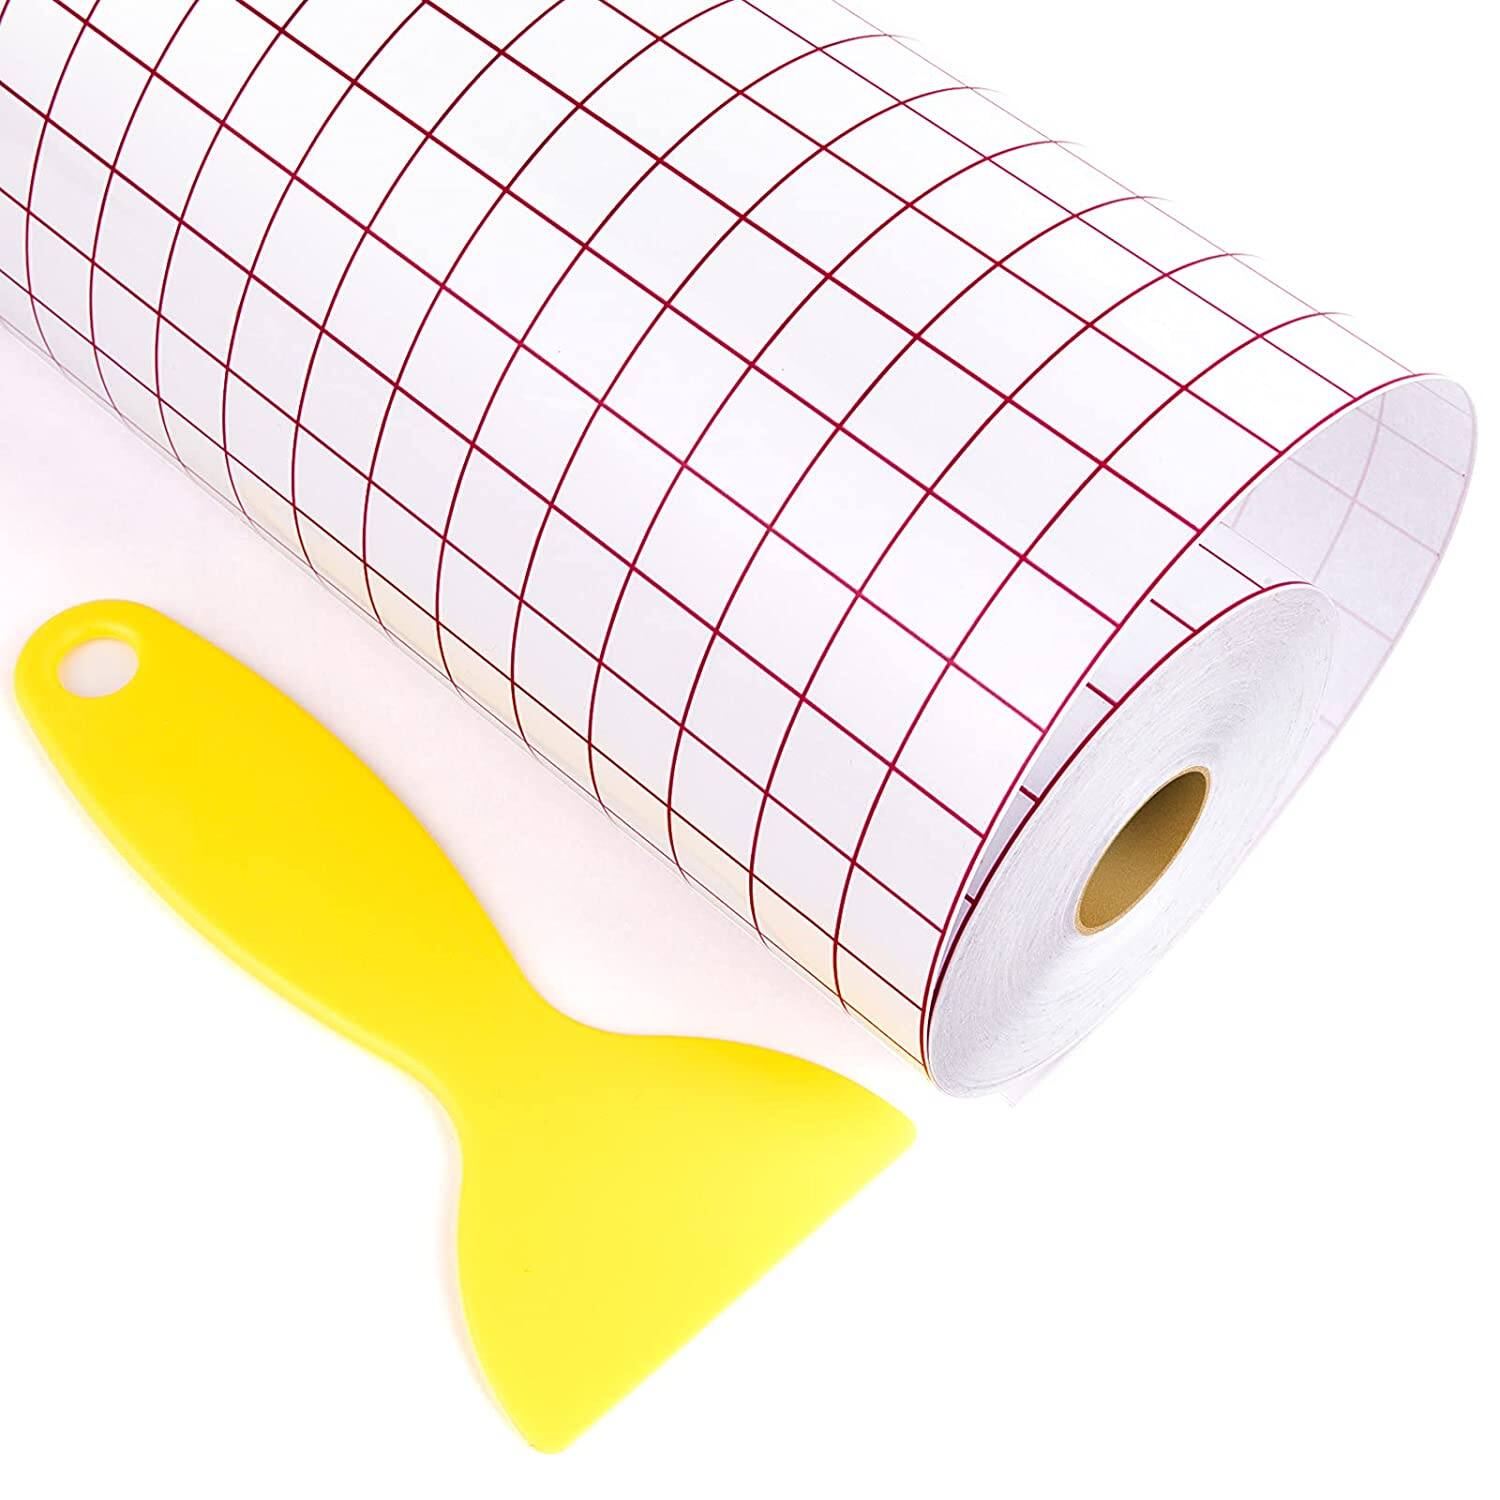 HTVRONT 12" x 80 FT W/Red Alignment Grid Transfer Tape for $13.67 , 12" x 30 FT W/Blue Alignment Grid Transfer Tape for $9.09  + Free Shipping w/ Prime or $25+